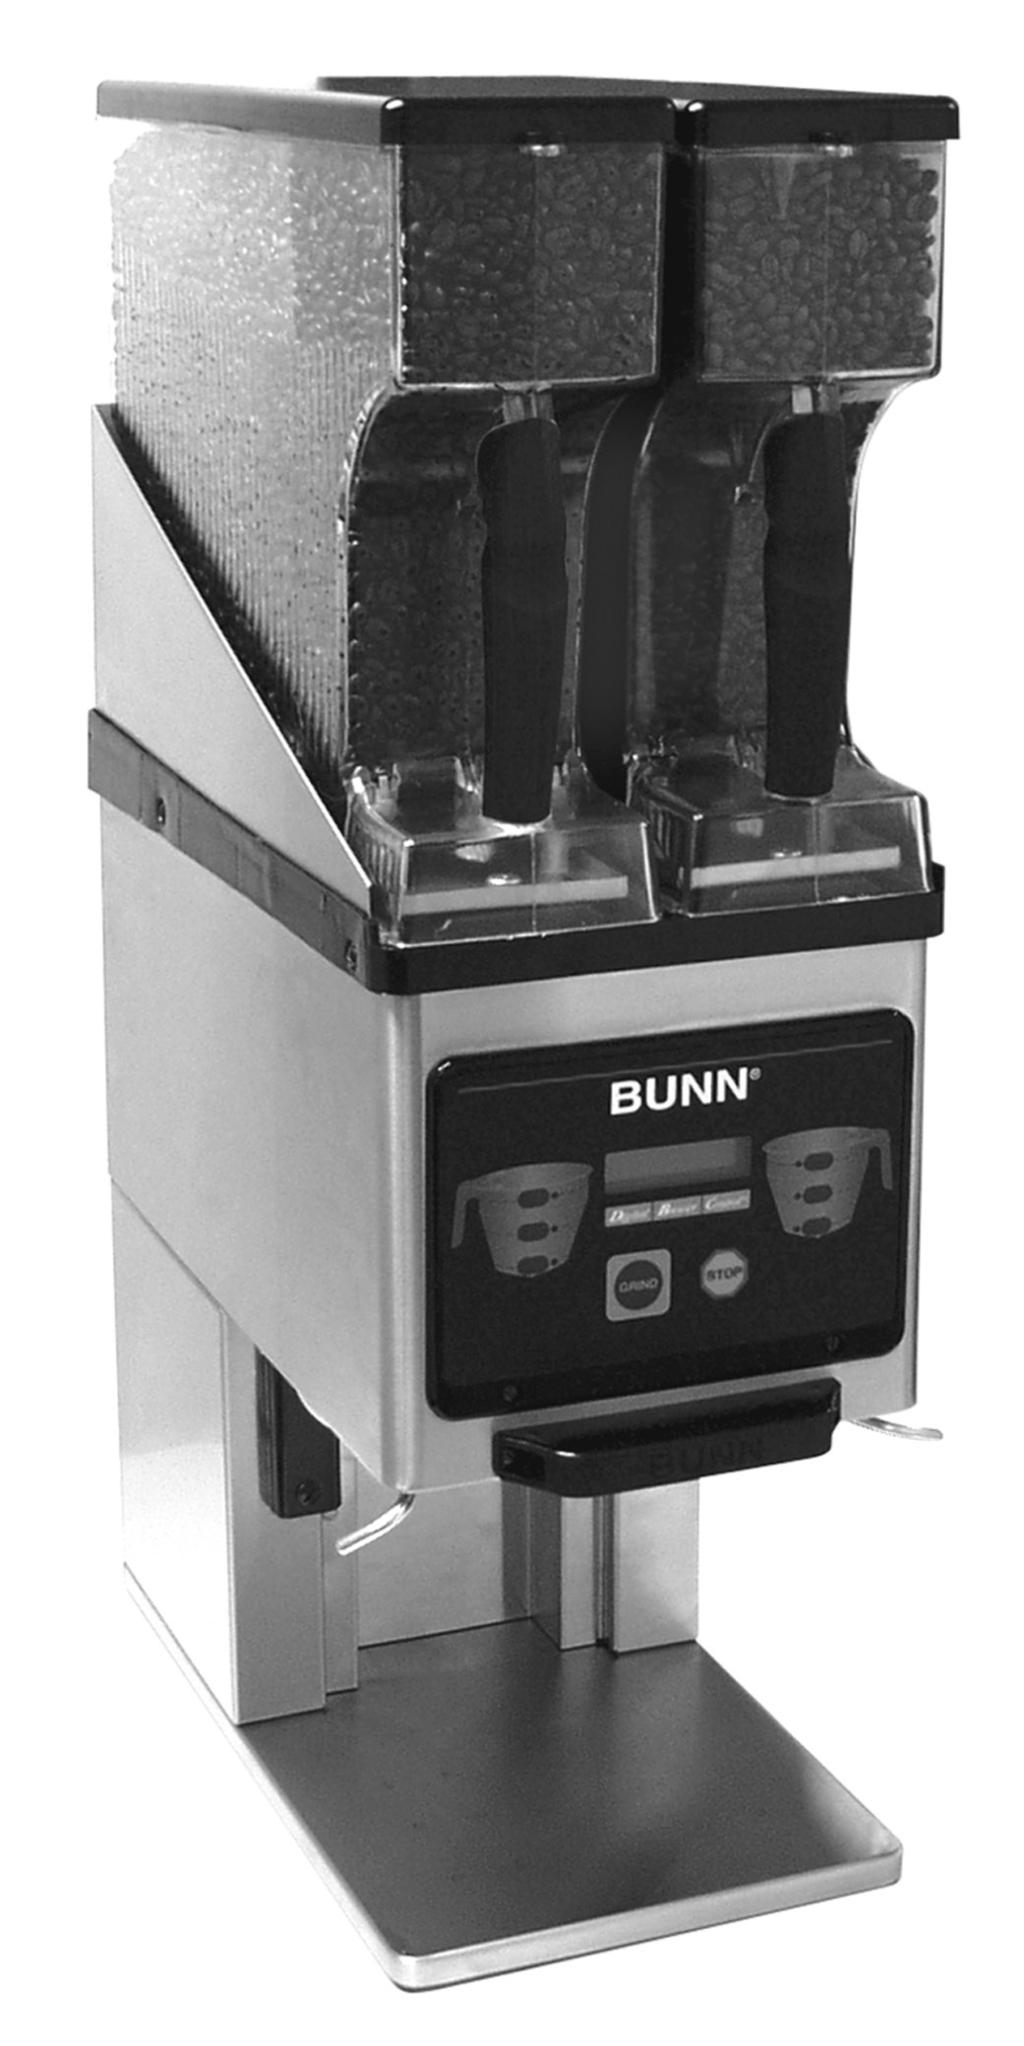 MHG for use with Smart Funnel INSTALLATION & OPERATING GUIDE BUNN-O-MATIC CORPORATION POST OFFICE BOX 3227 SPRINGFIELD, ILLIIS 62708-3227 PHONE: (217) 529-6601 FAX: (217) 529-6644 To ensure you have